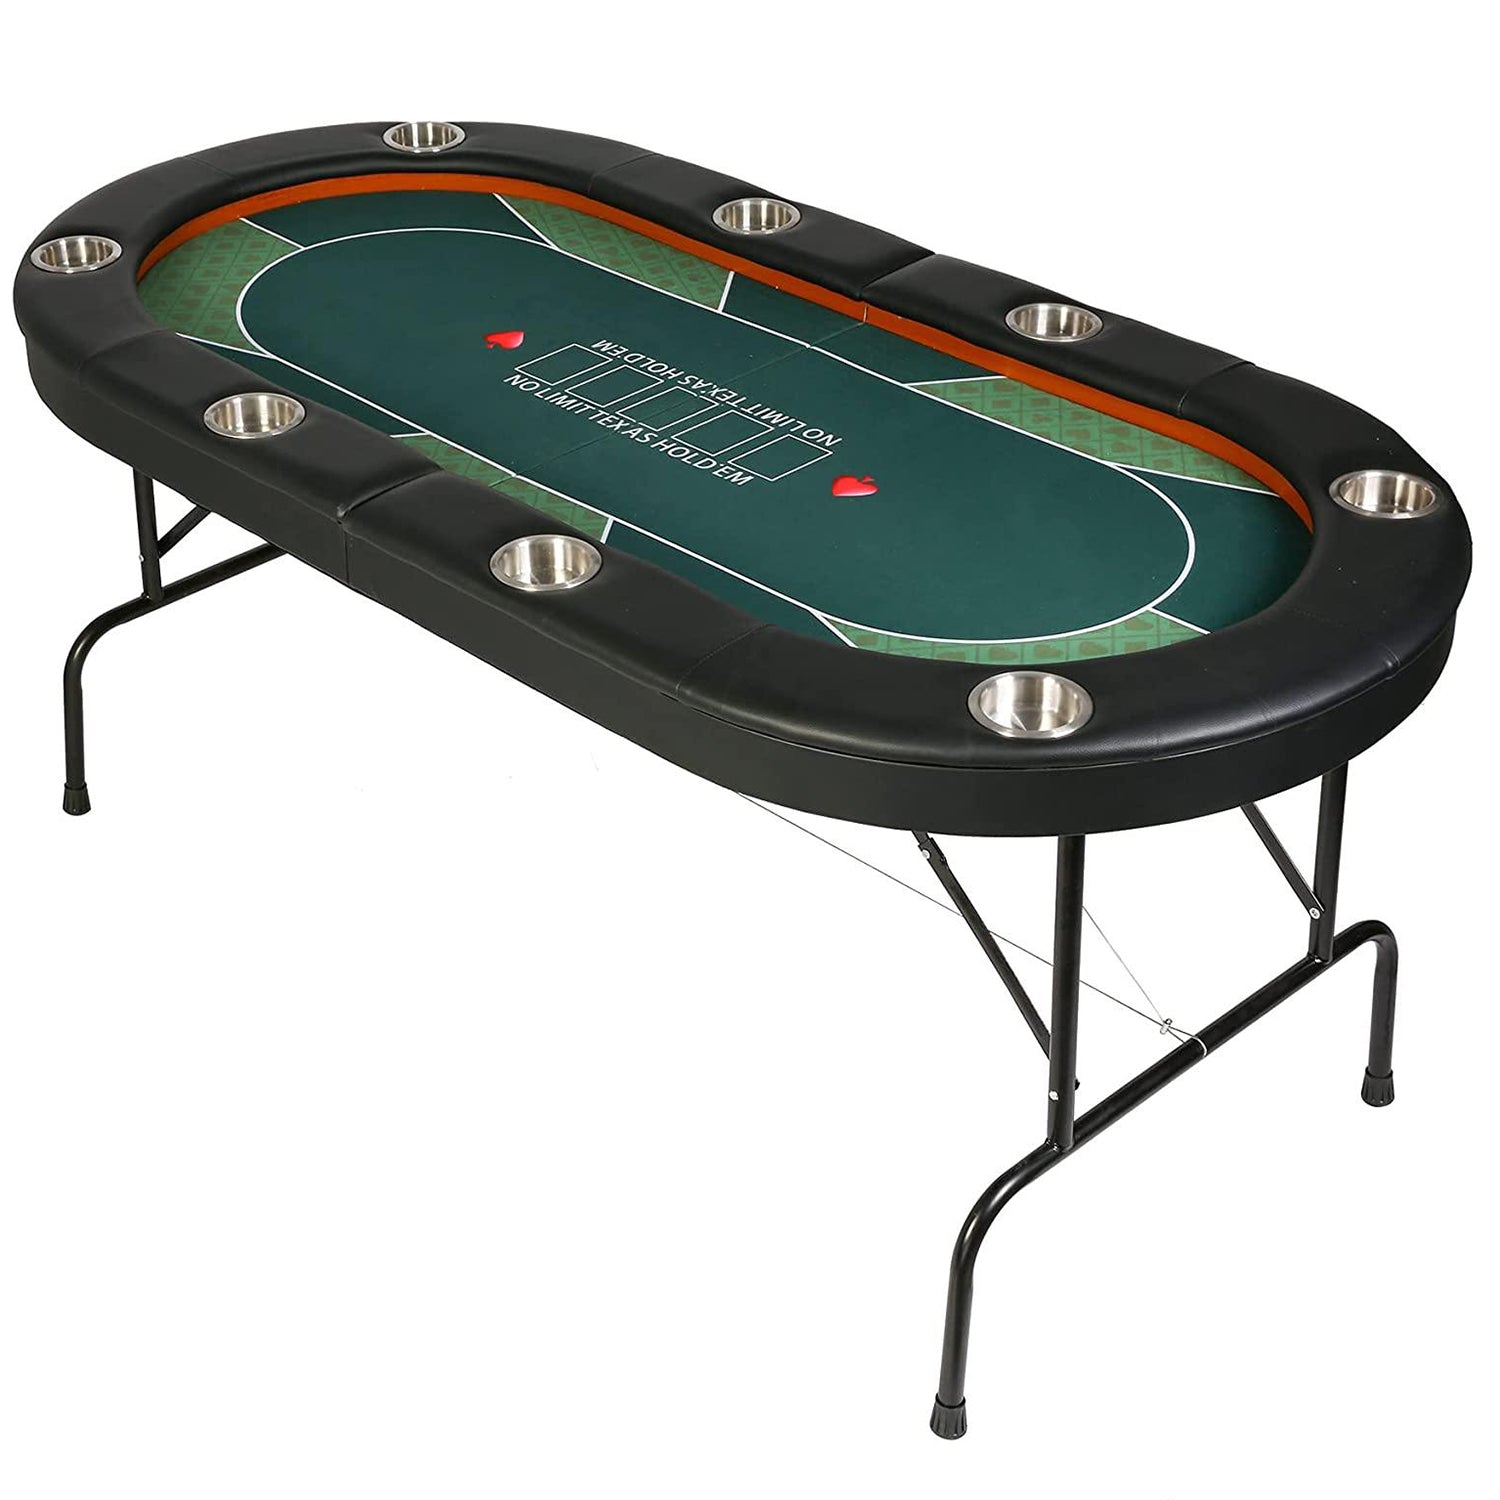 8 Players Foldable Texas Holdem Poker Table, Casino Table for Blackjack Board Game